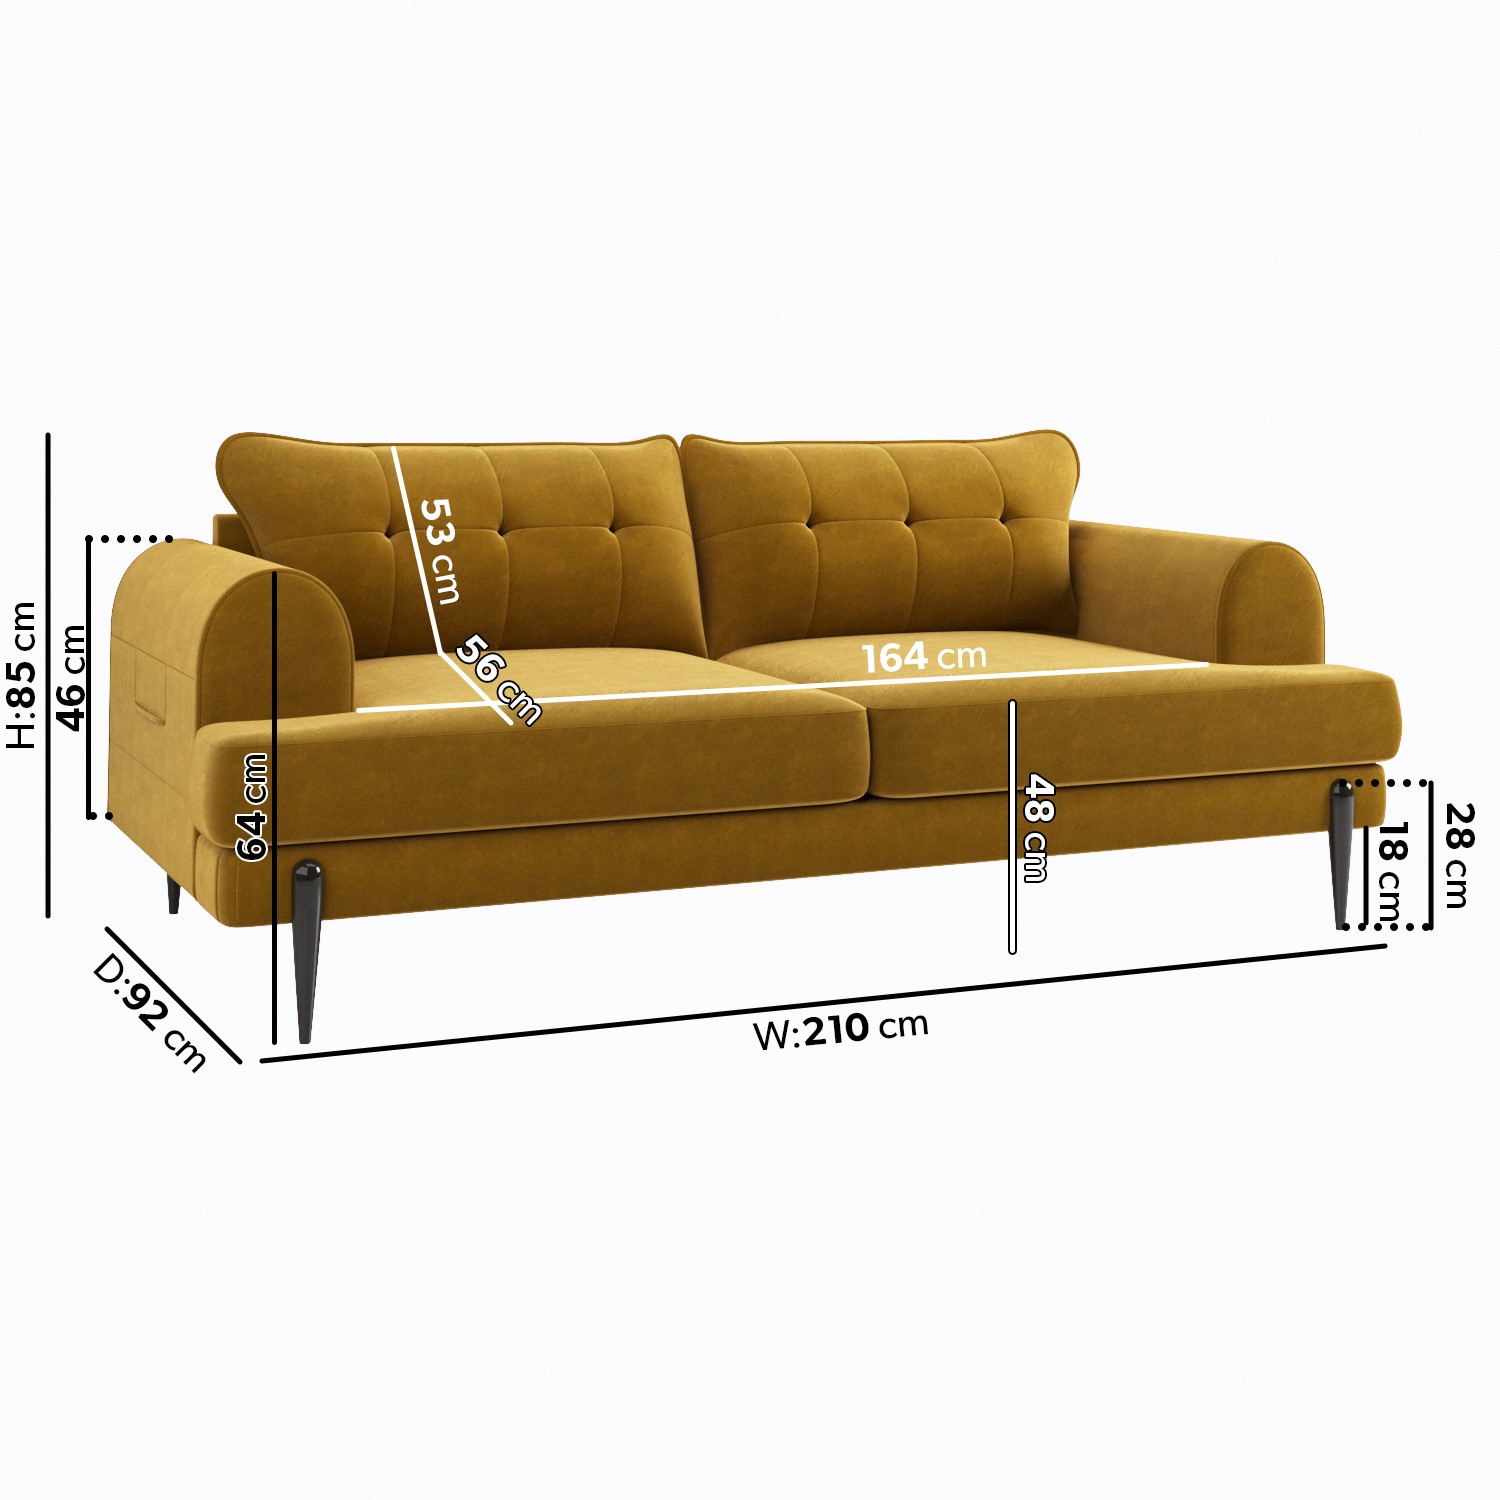 Read more about Mustard velvet 3 seater sofa rosie